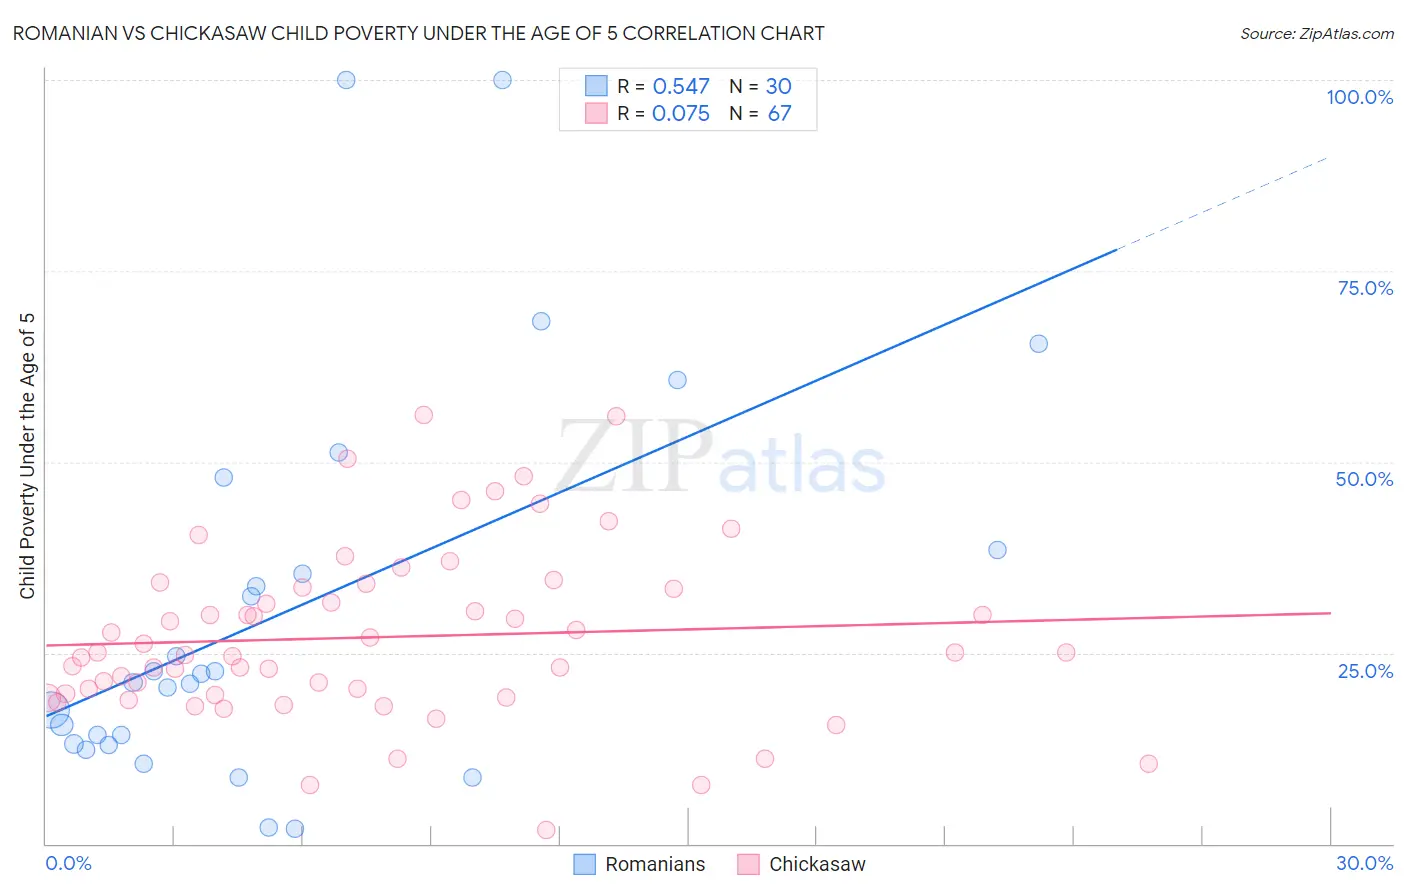 Romanian vs Chickasaw Child Poverty Under the Age of 5